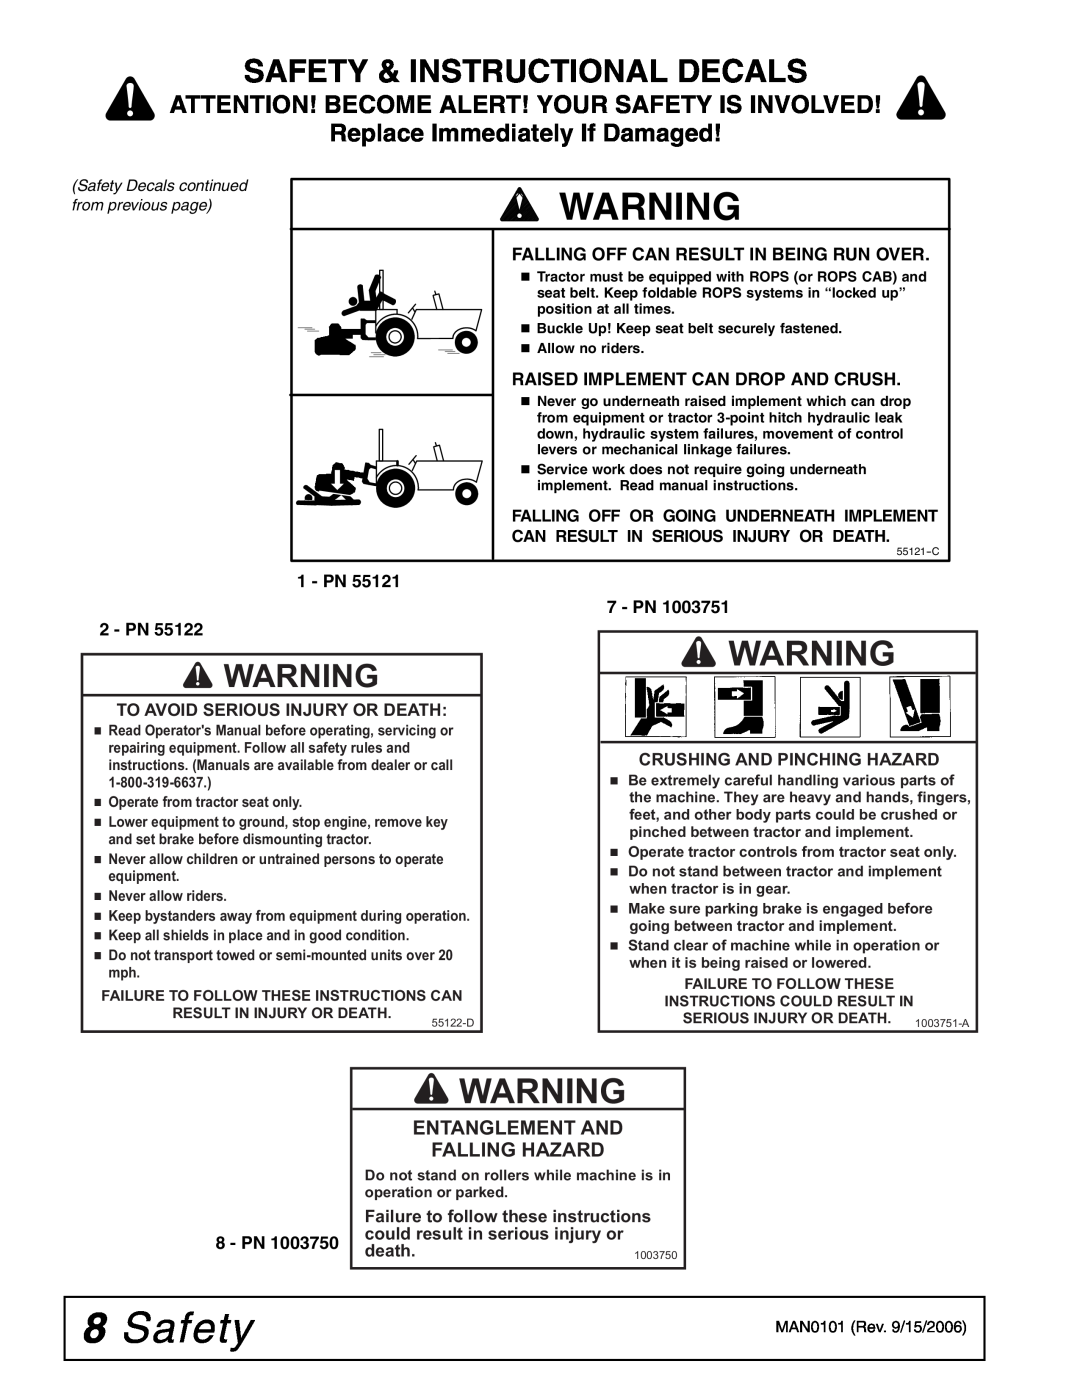 Woods Equipment STR48S-2, STR60S-2 Safety & Instructional Decals, Attention! Become Alert! Your Safety Is Involved, Pn 